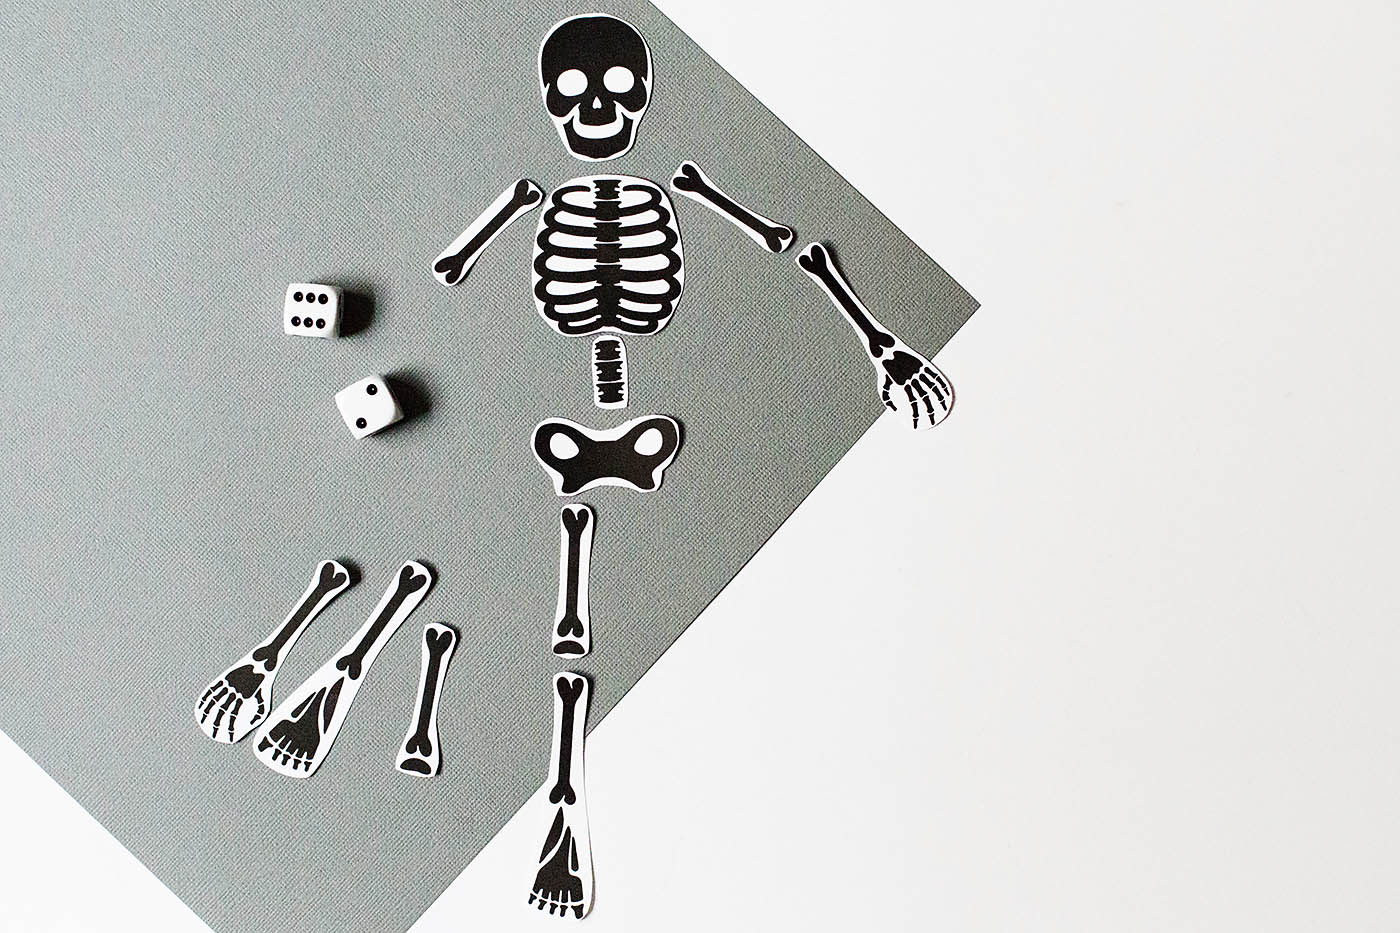 Free printable skeleton game - great for a halloween party or just for fun!